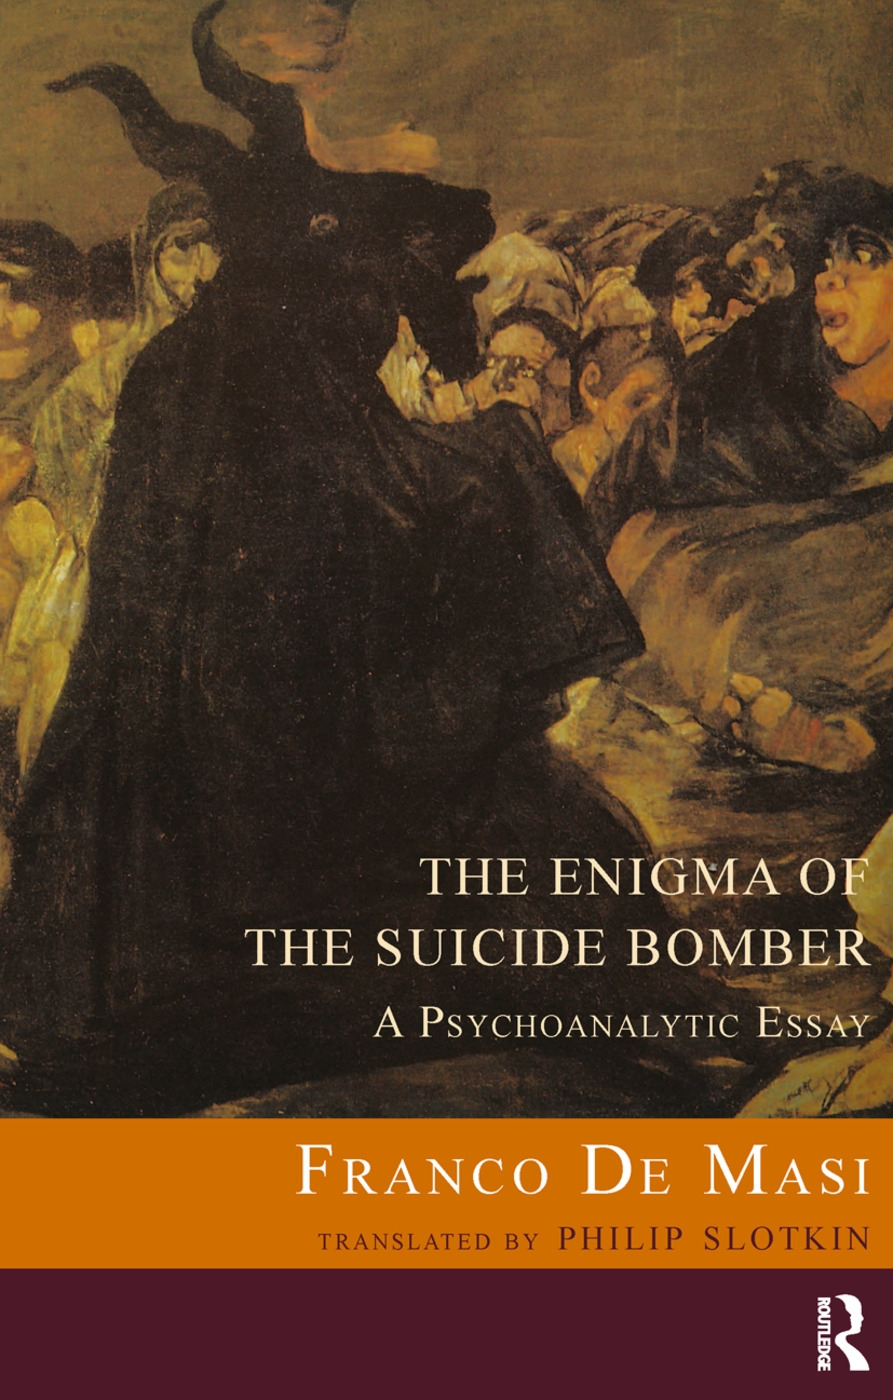 The Enigma of the Suicide Bomber: A Psychoanalytic Essay